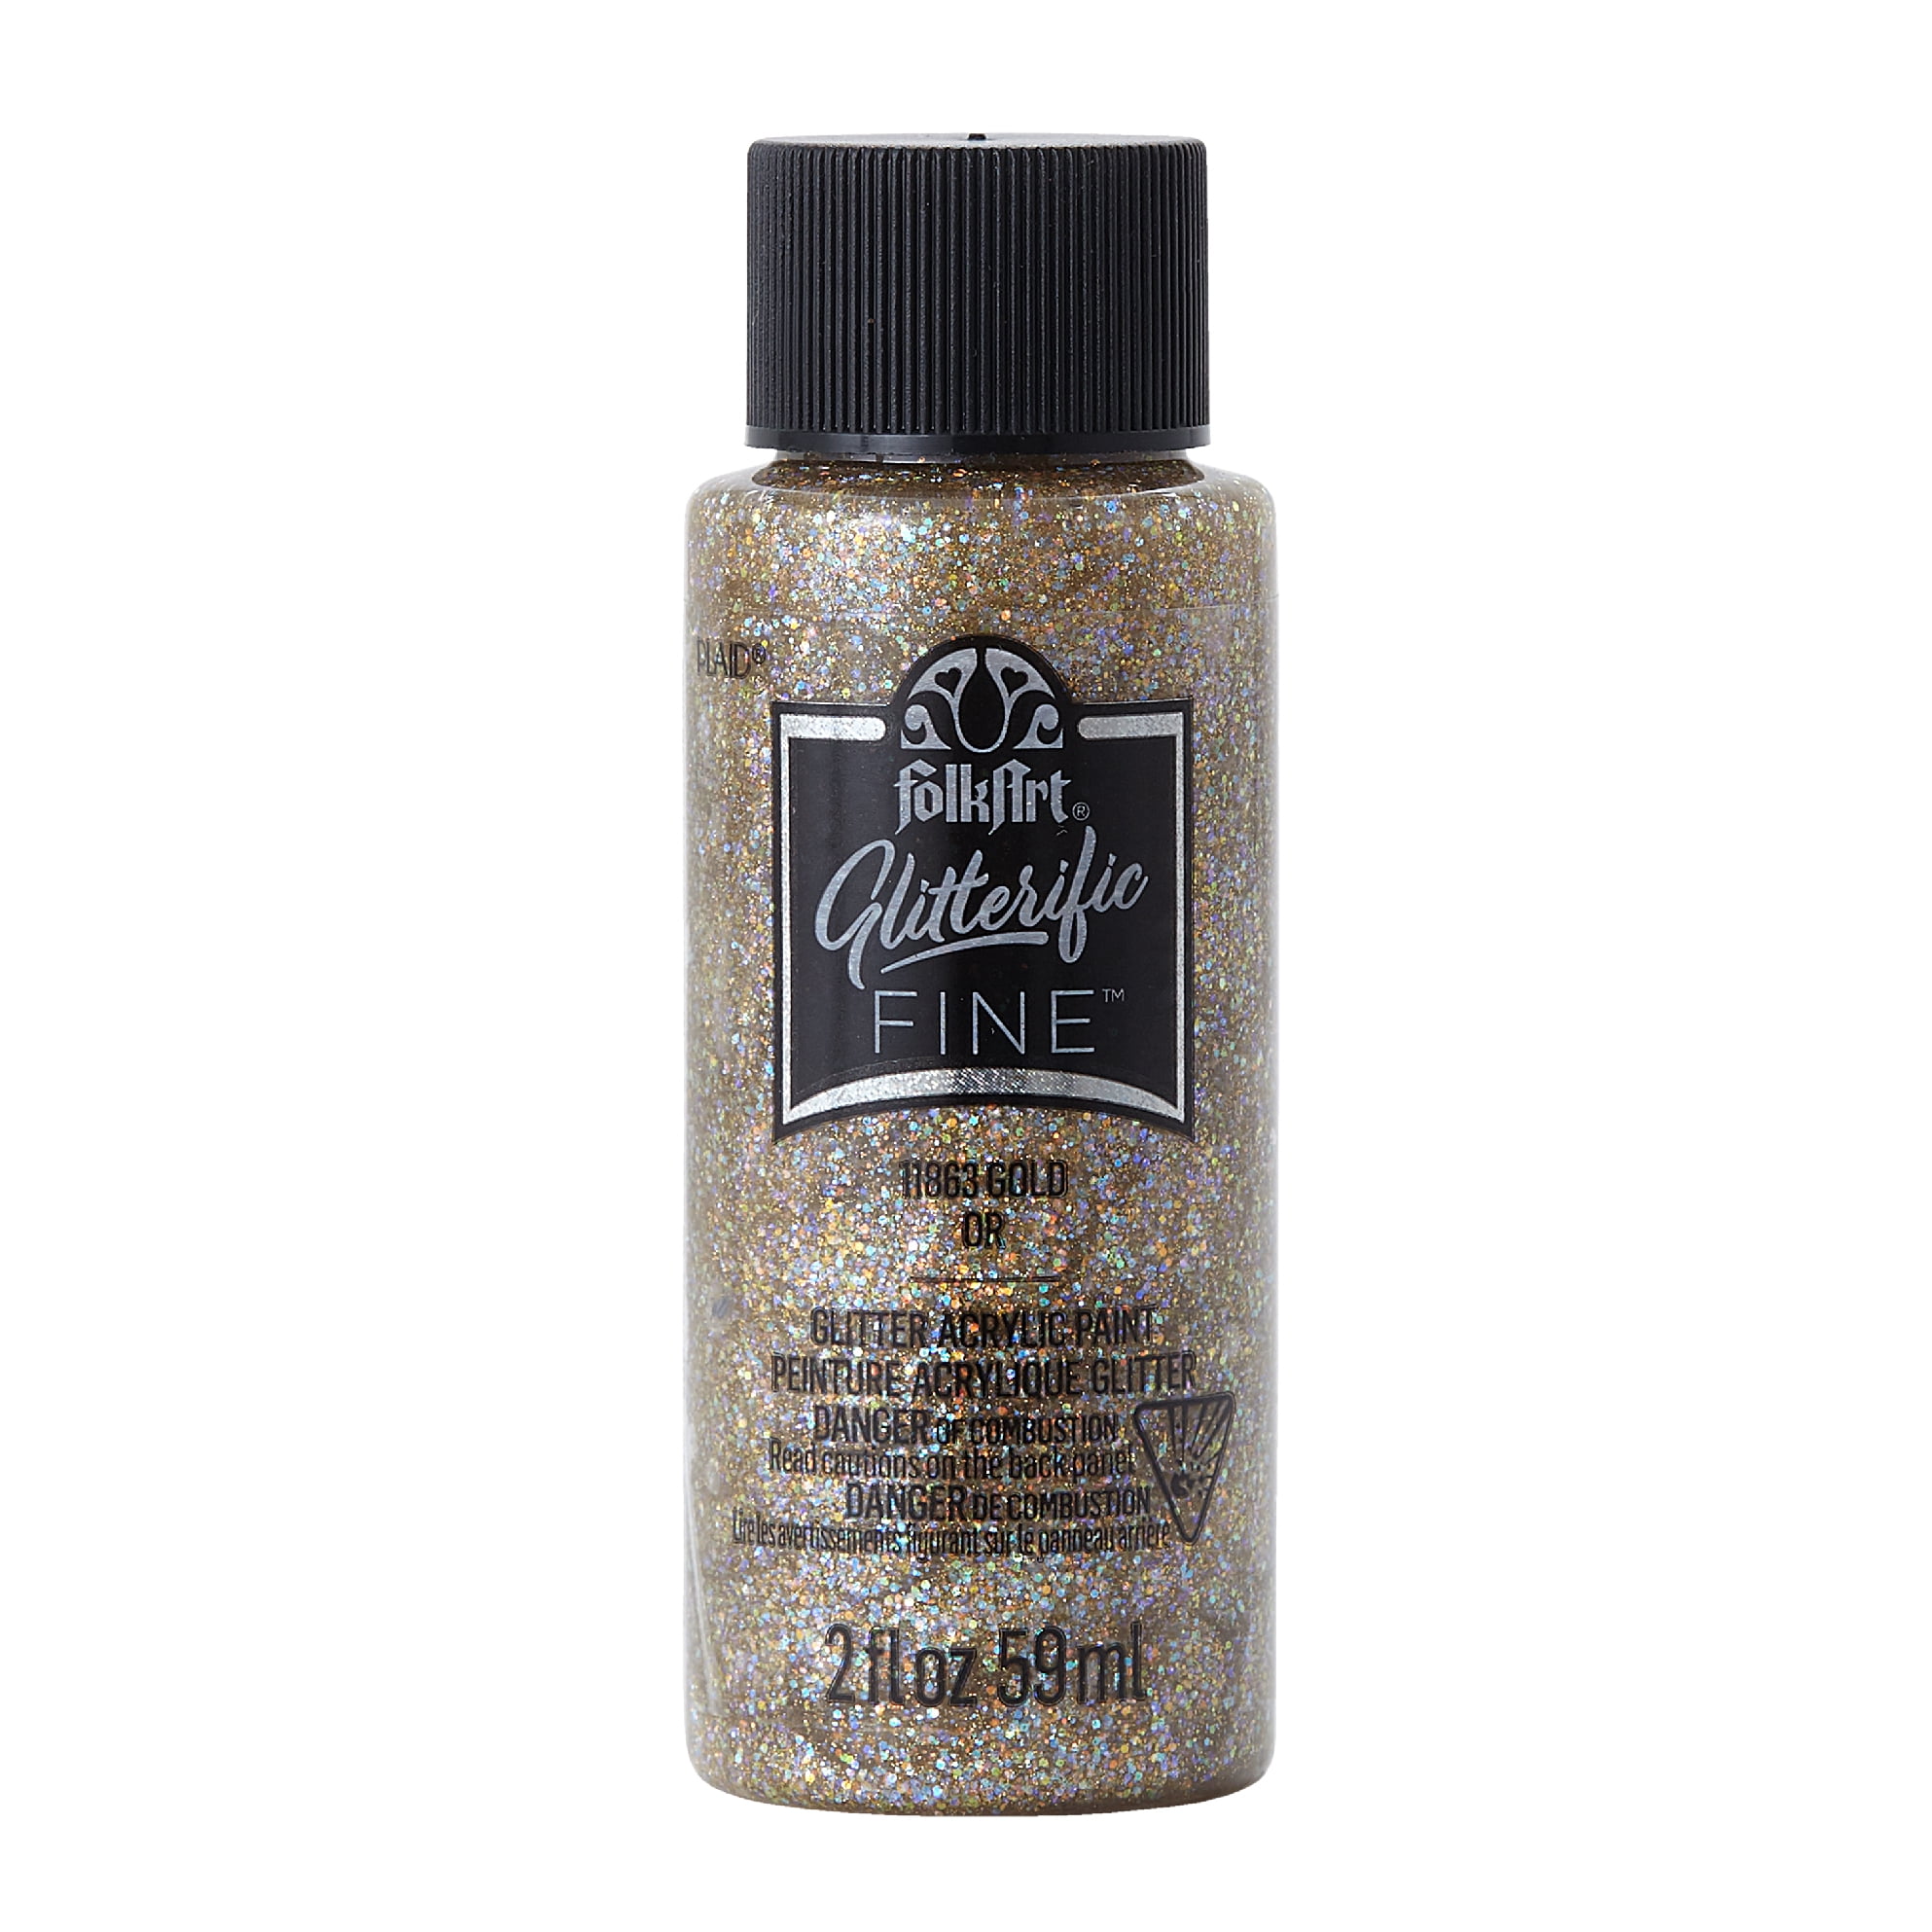  FolkArt Glitterific Fine Assorted Acrylic Craft Paints, Fine  Gold 2 fl oz Premium Acrylic Paint With Glitter Finish, Perfect For Easy To  Apply DIY Arts And Crafts, 11863 : Arts, Crafts